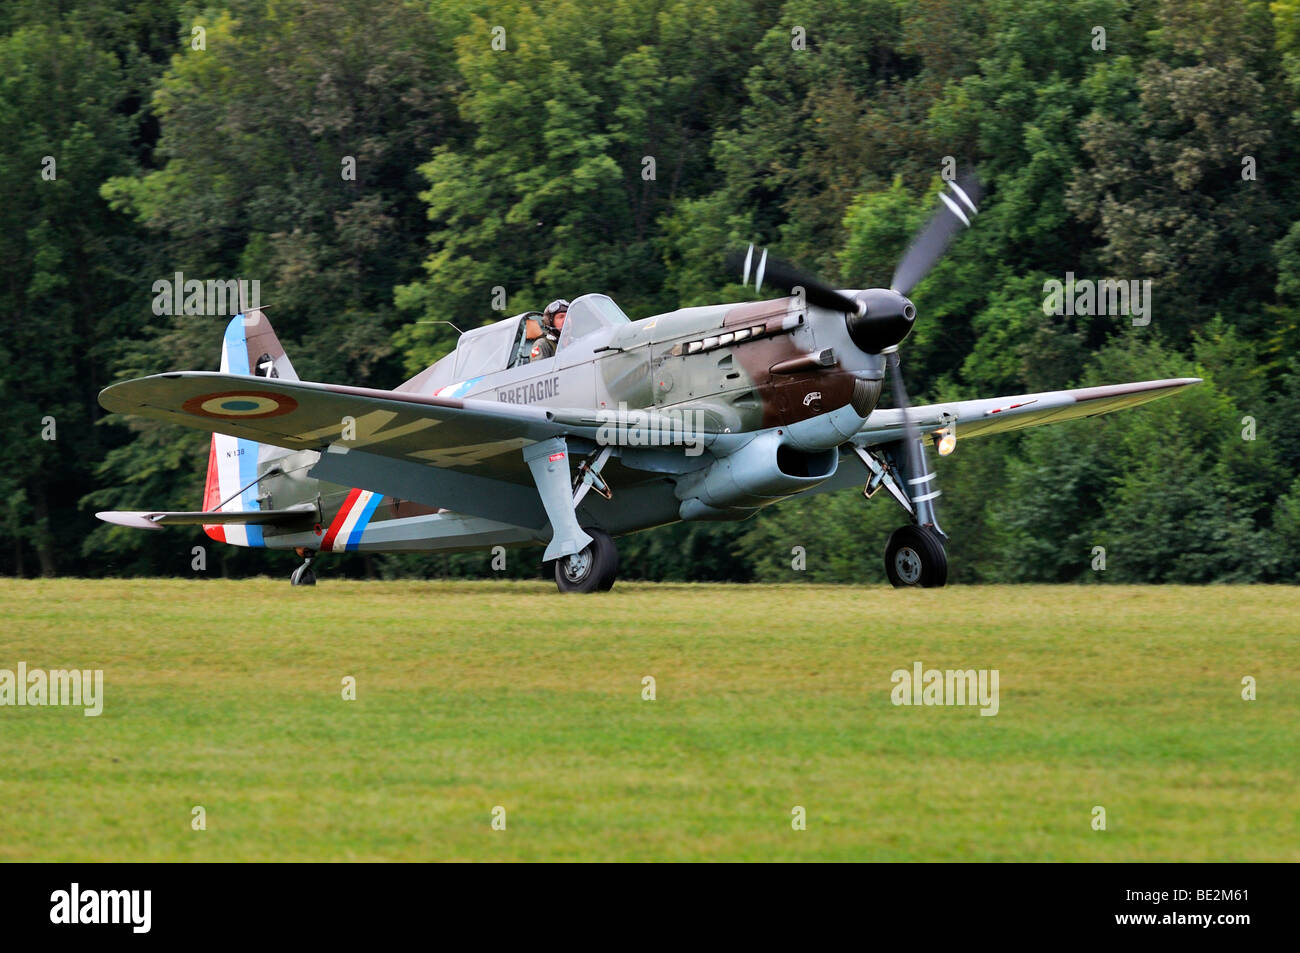 French fighter aircraft Morane-Saulnier D-3801 J-143, Europe's largest meeting of vintage planes at Hahnweide, Kirchheim-Teck,  Stock Photo